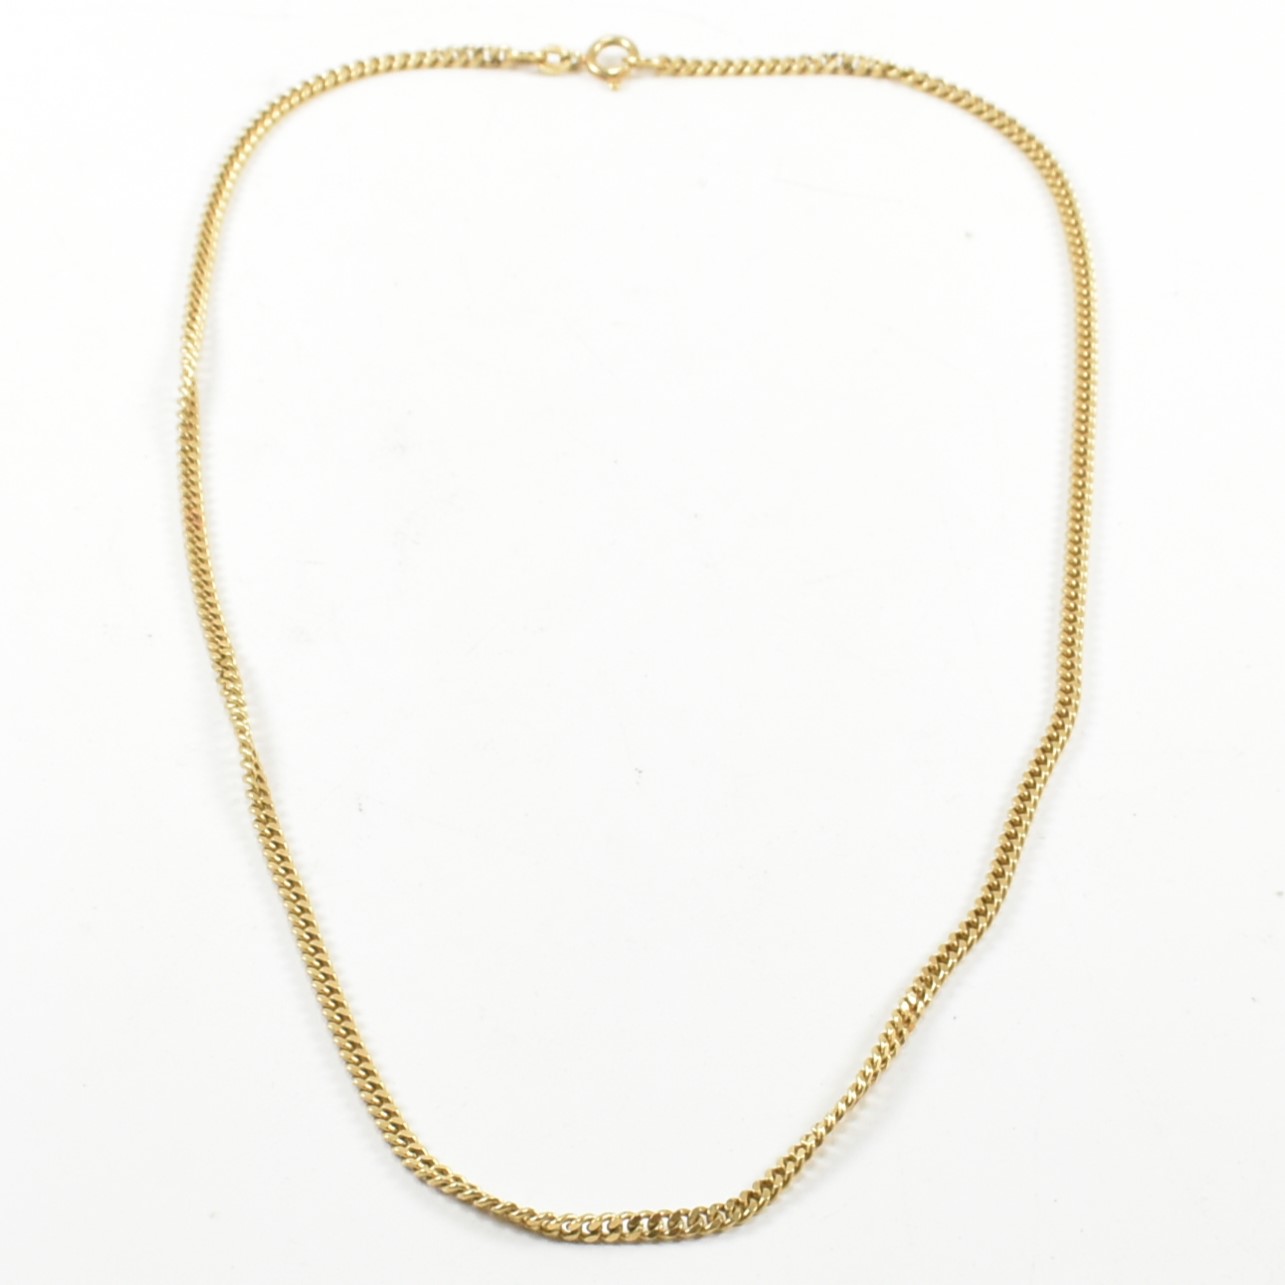 ITALIAN 18CT GOLD CURB LINK CHAIN NECKLACE - Image 3 of 4